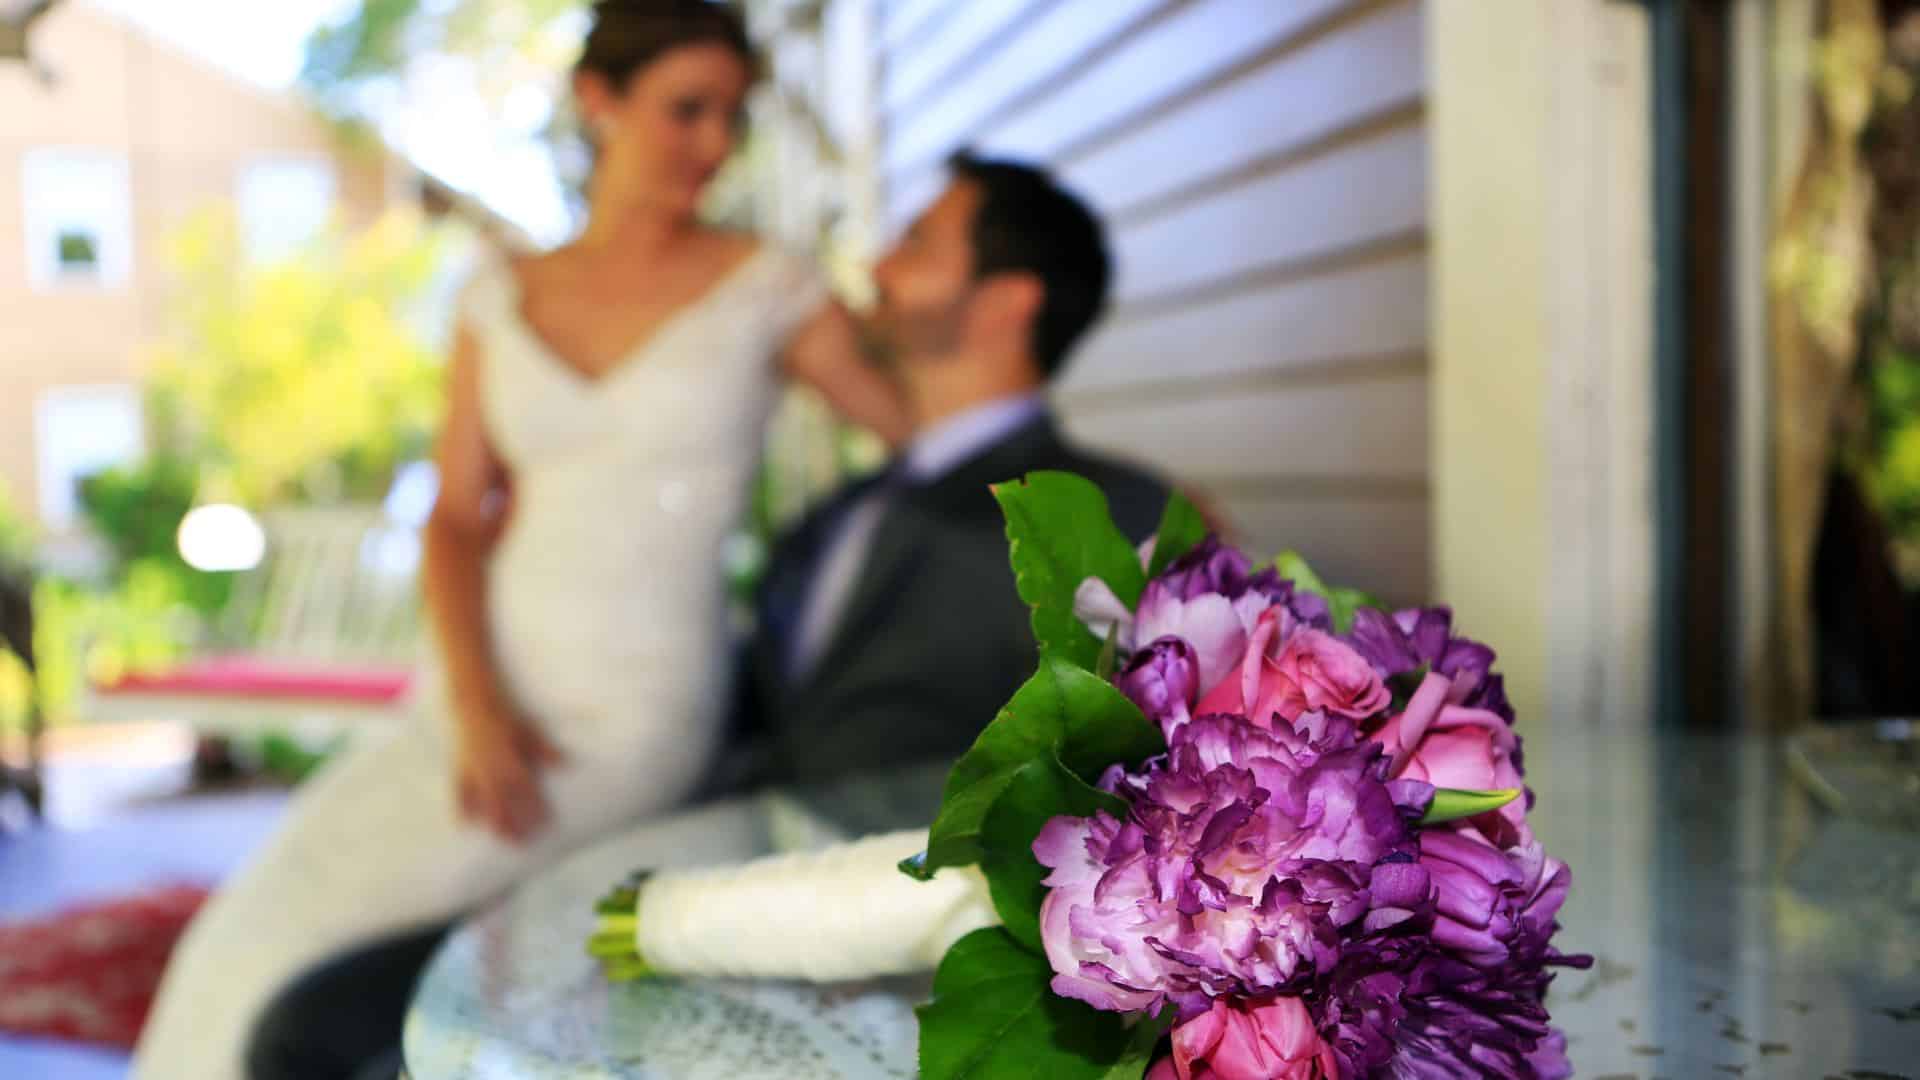 Close up view of bridal bouquet with pink and purple flowers with bride and groom in the background